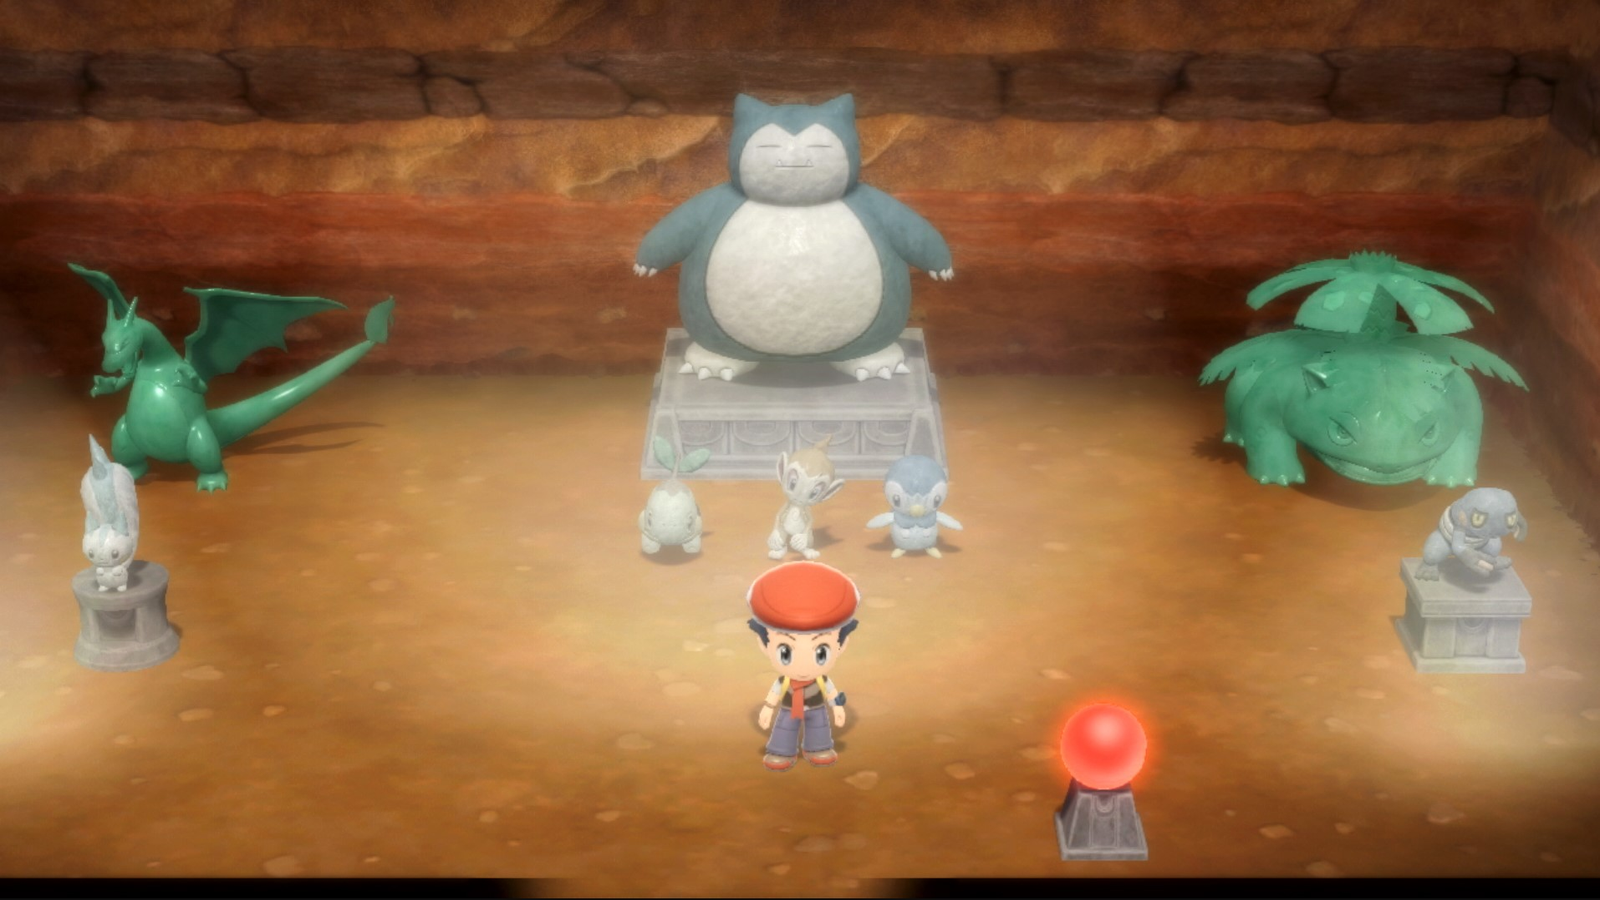 Pokémon BDSP: Where to Find Dawn Stone (& What It's For)